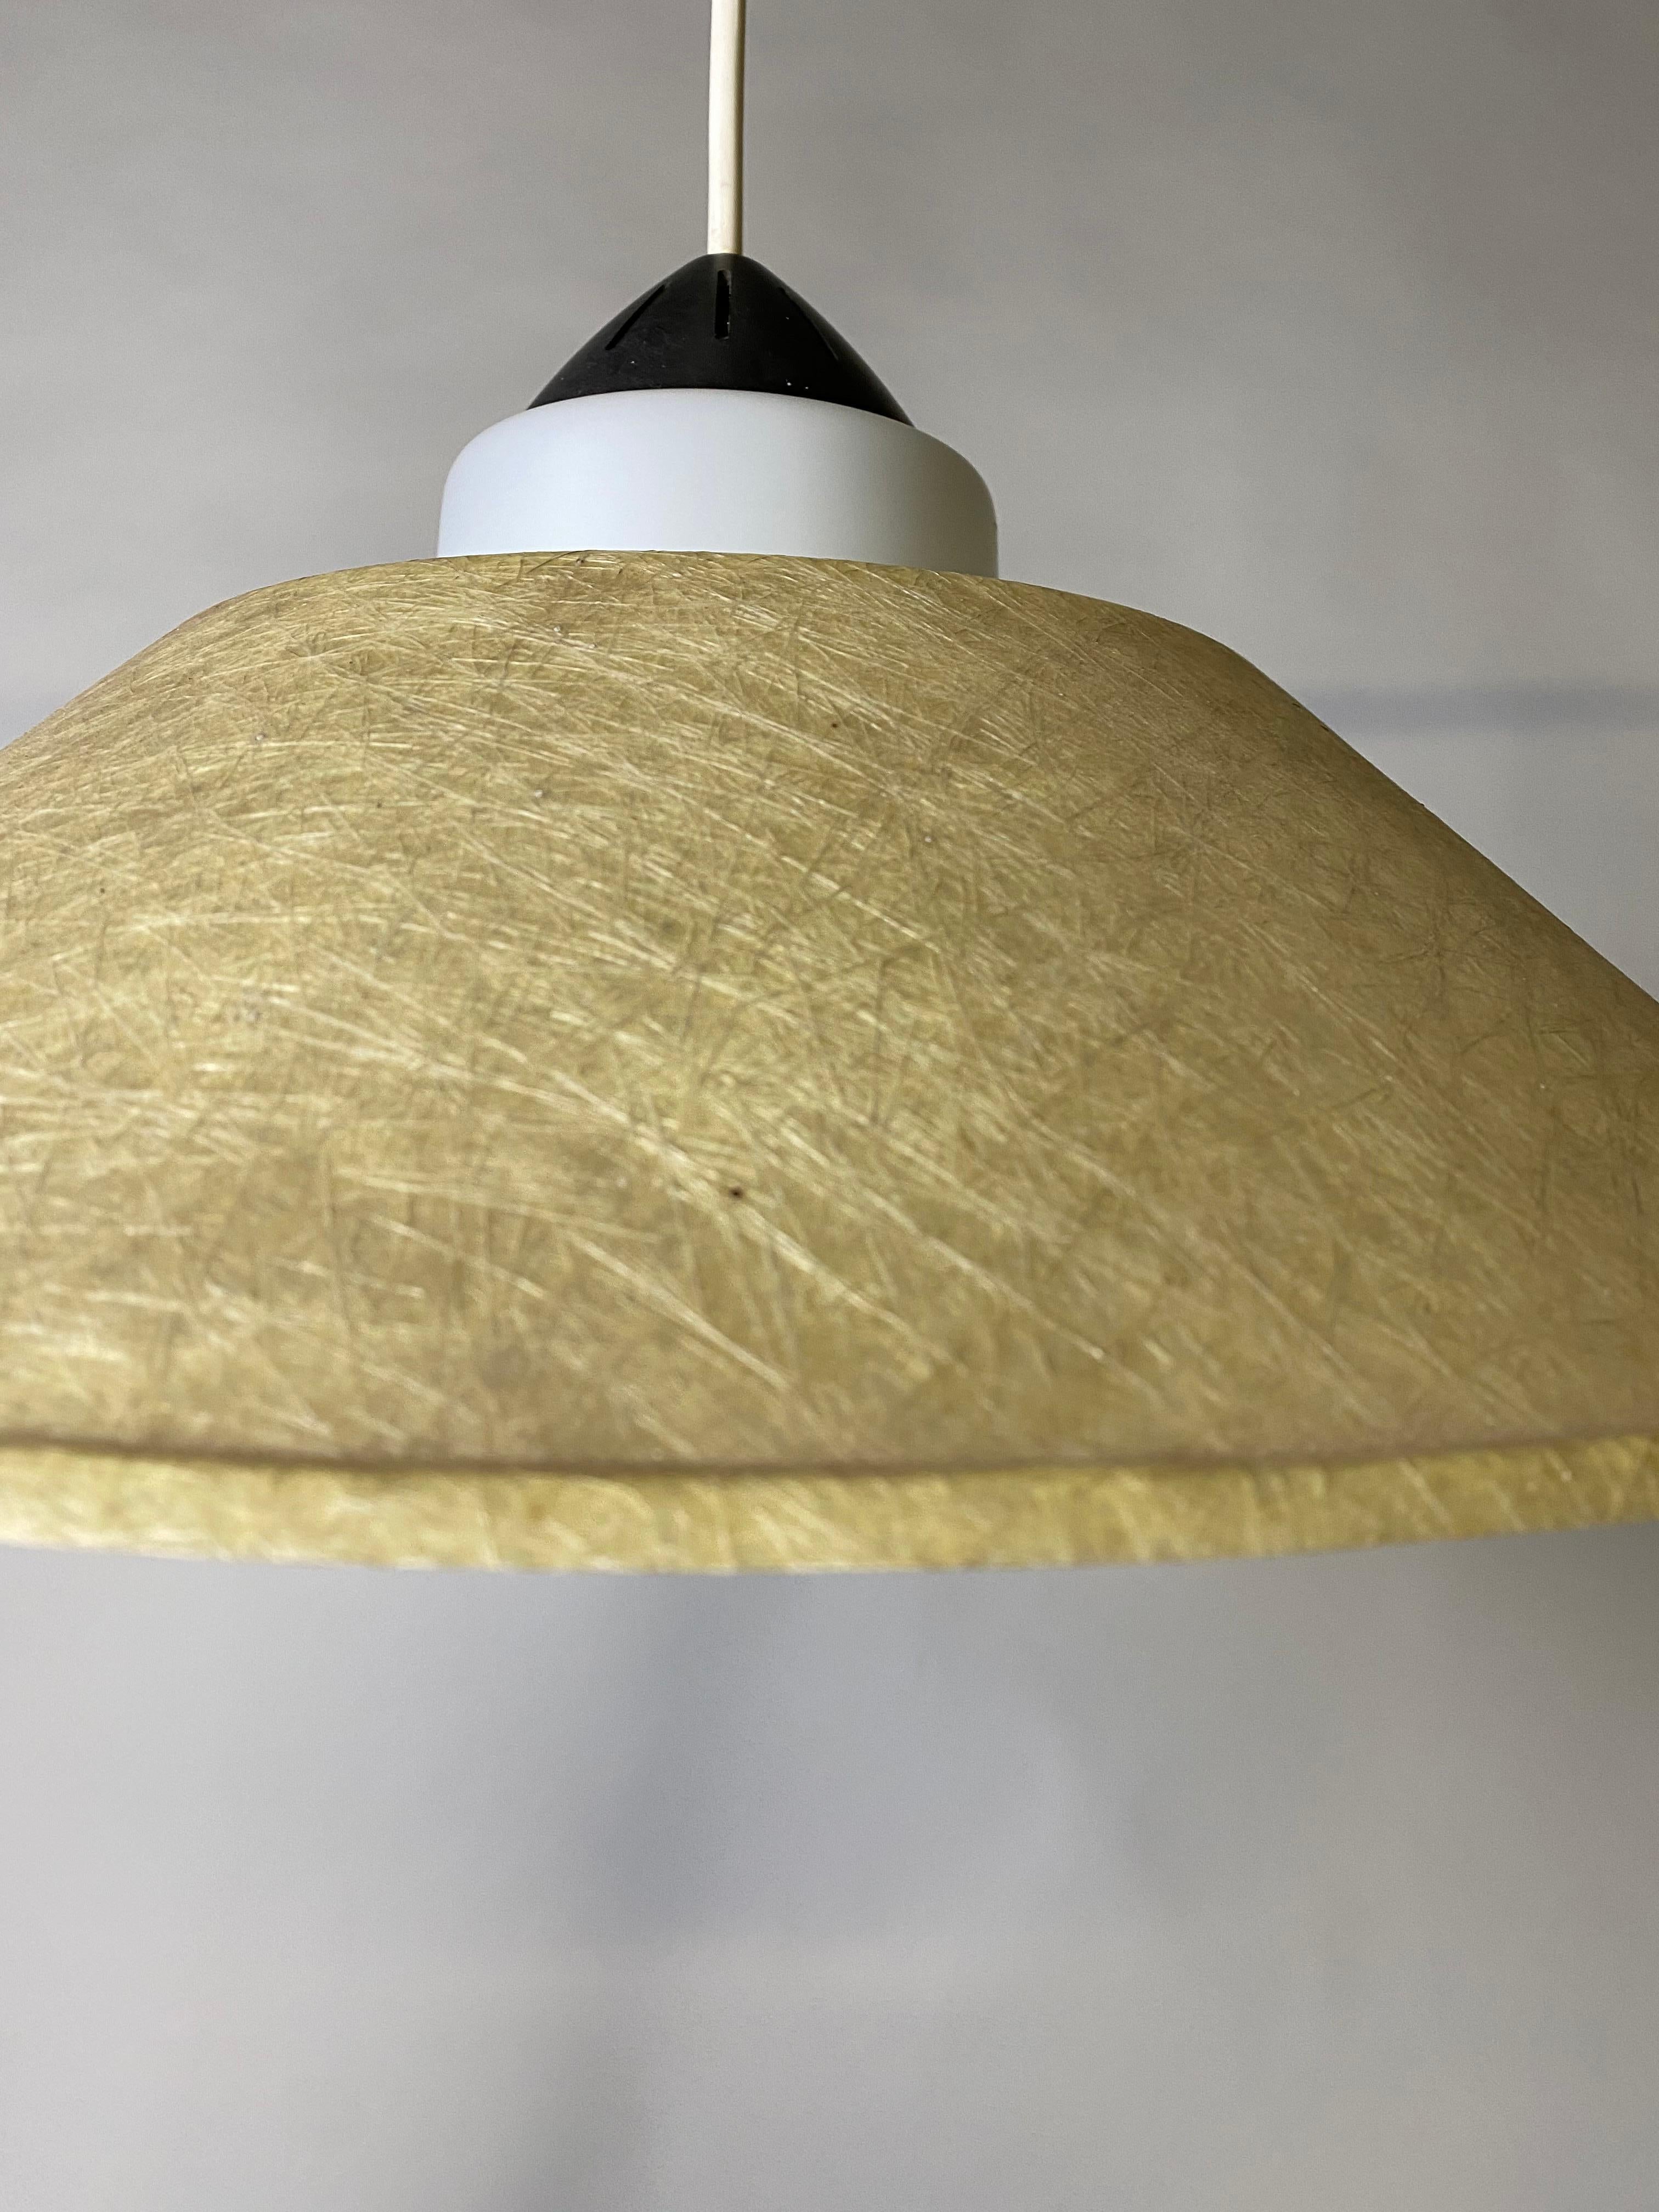 Rare Fiberglass /Opaline Glass Ceiling Lamp by Louis Kalff for Philips, 1950s For Sale 4